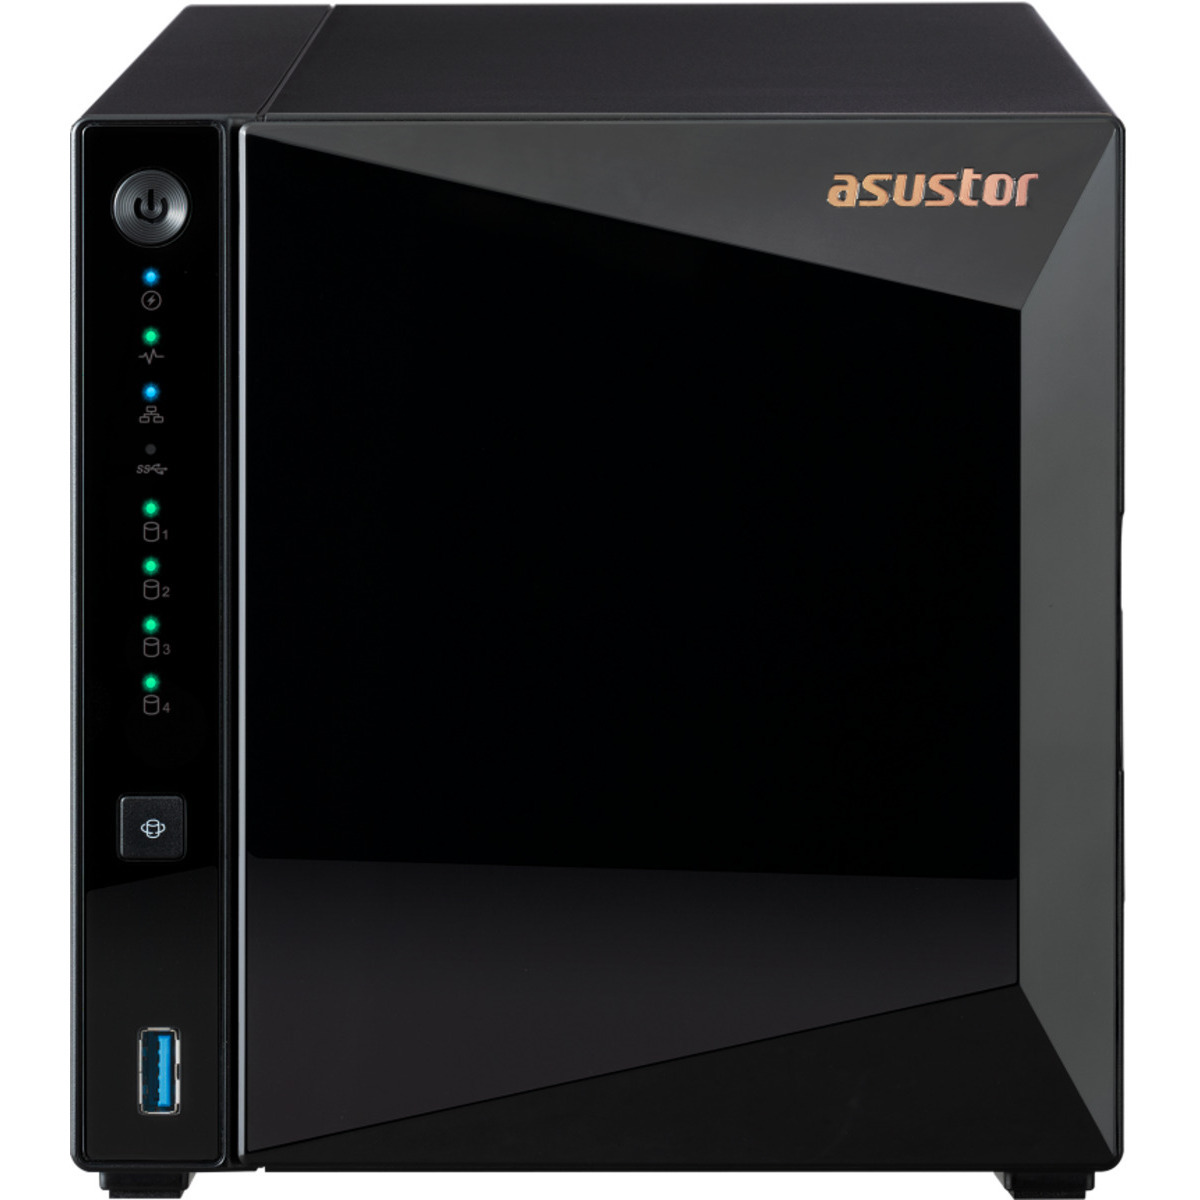 buy ASUSTOR DRIVESTOR 4 Pro AS3304T 16tb Desktop NAS - Network Attached Storage Device 4x4000gb Toshiba MN Series MN08ADA400E 3.5 7200rpm SATA 6Gb/s HDD NAS Class Drives Installed - Burn-In Tested - ON SALE - nas headquarters buy network attached storage server device das new raid-5 free shipping simply usa christmas holiday black friday cyber monday week sale happening now! DRIVESTOR 4 Pro AS3304T